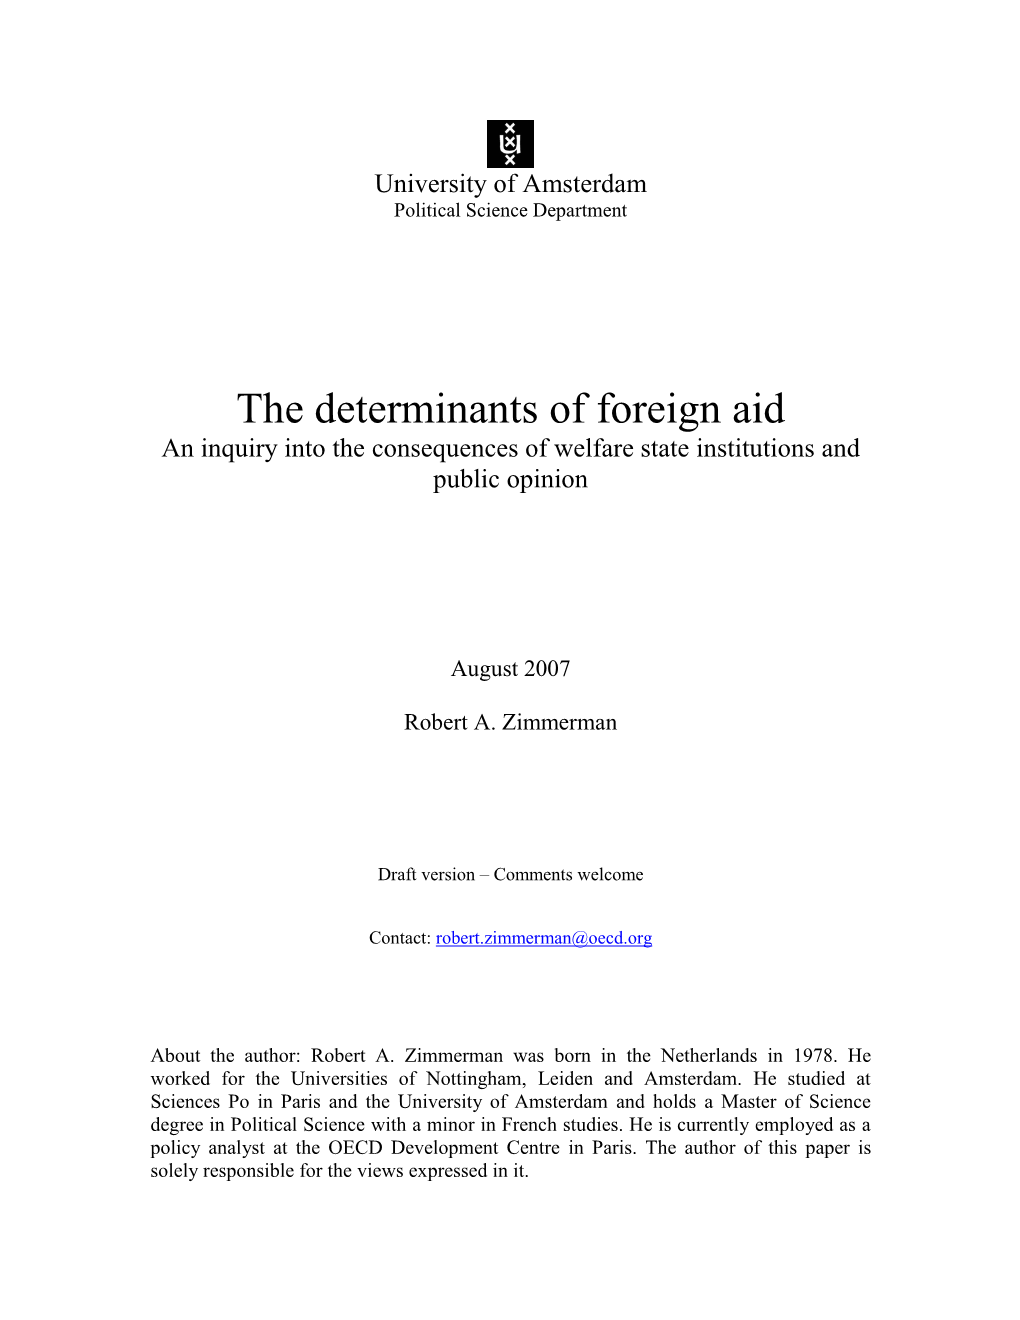 The Determinants of Foreign Aid an Inquiry Into the Consequences of Welfare State Institutions and Public Opinion